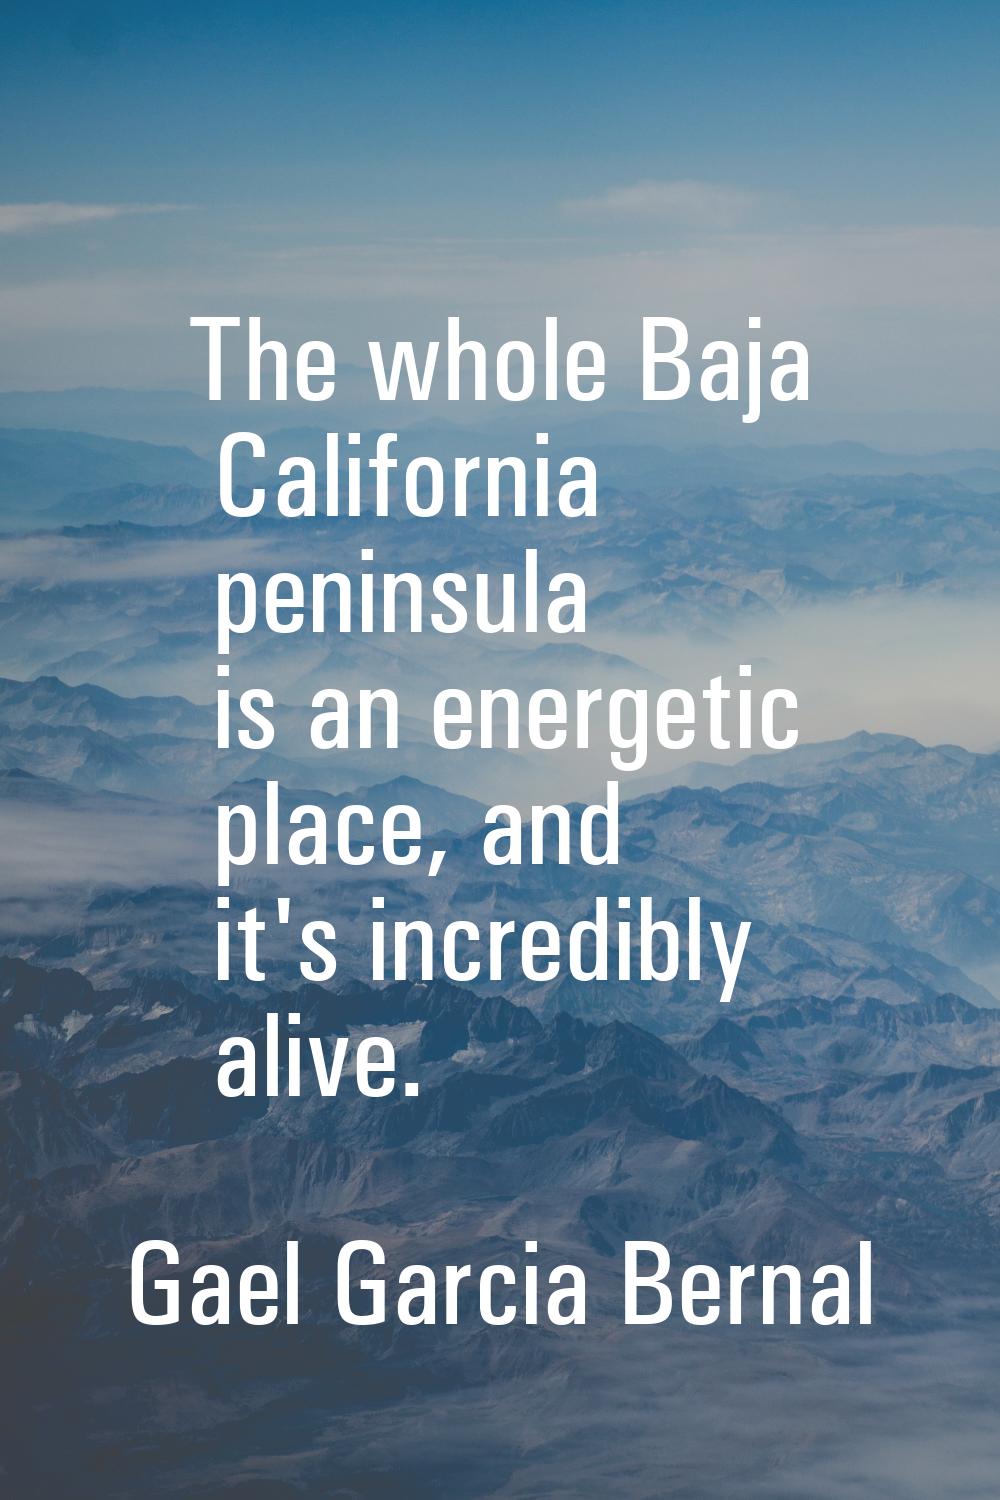 The whole Baja California peninsula is an energetic place, and it's incredibly alive.